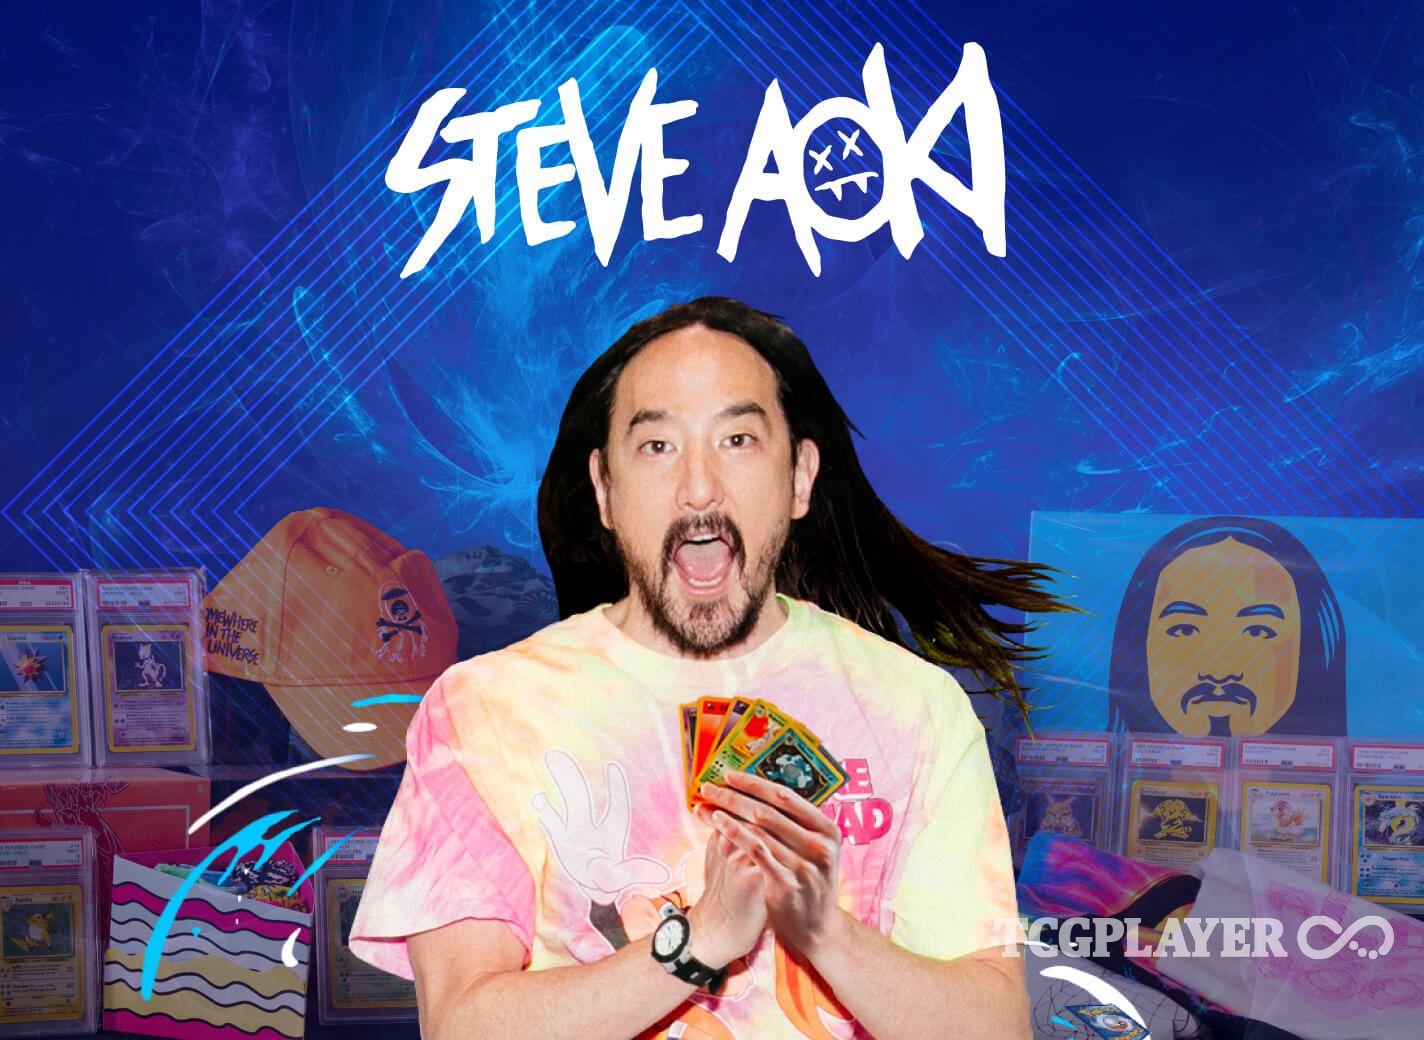 DJ Steve Aoki Brings Gold to One Piece with New Track - The Good